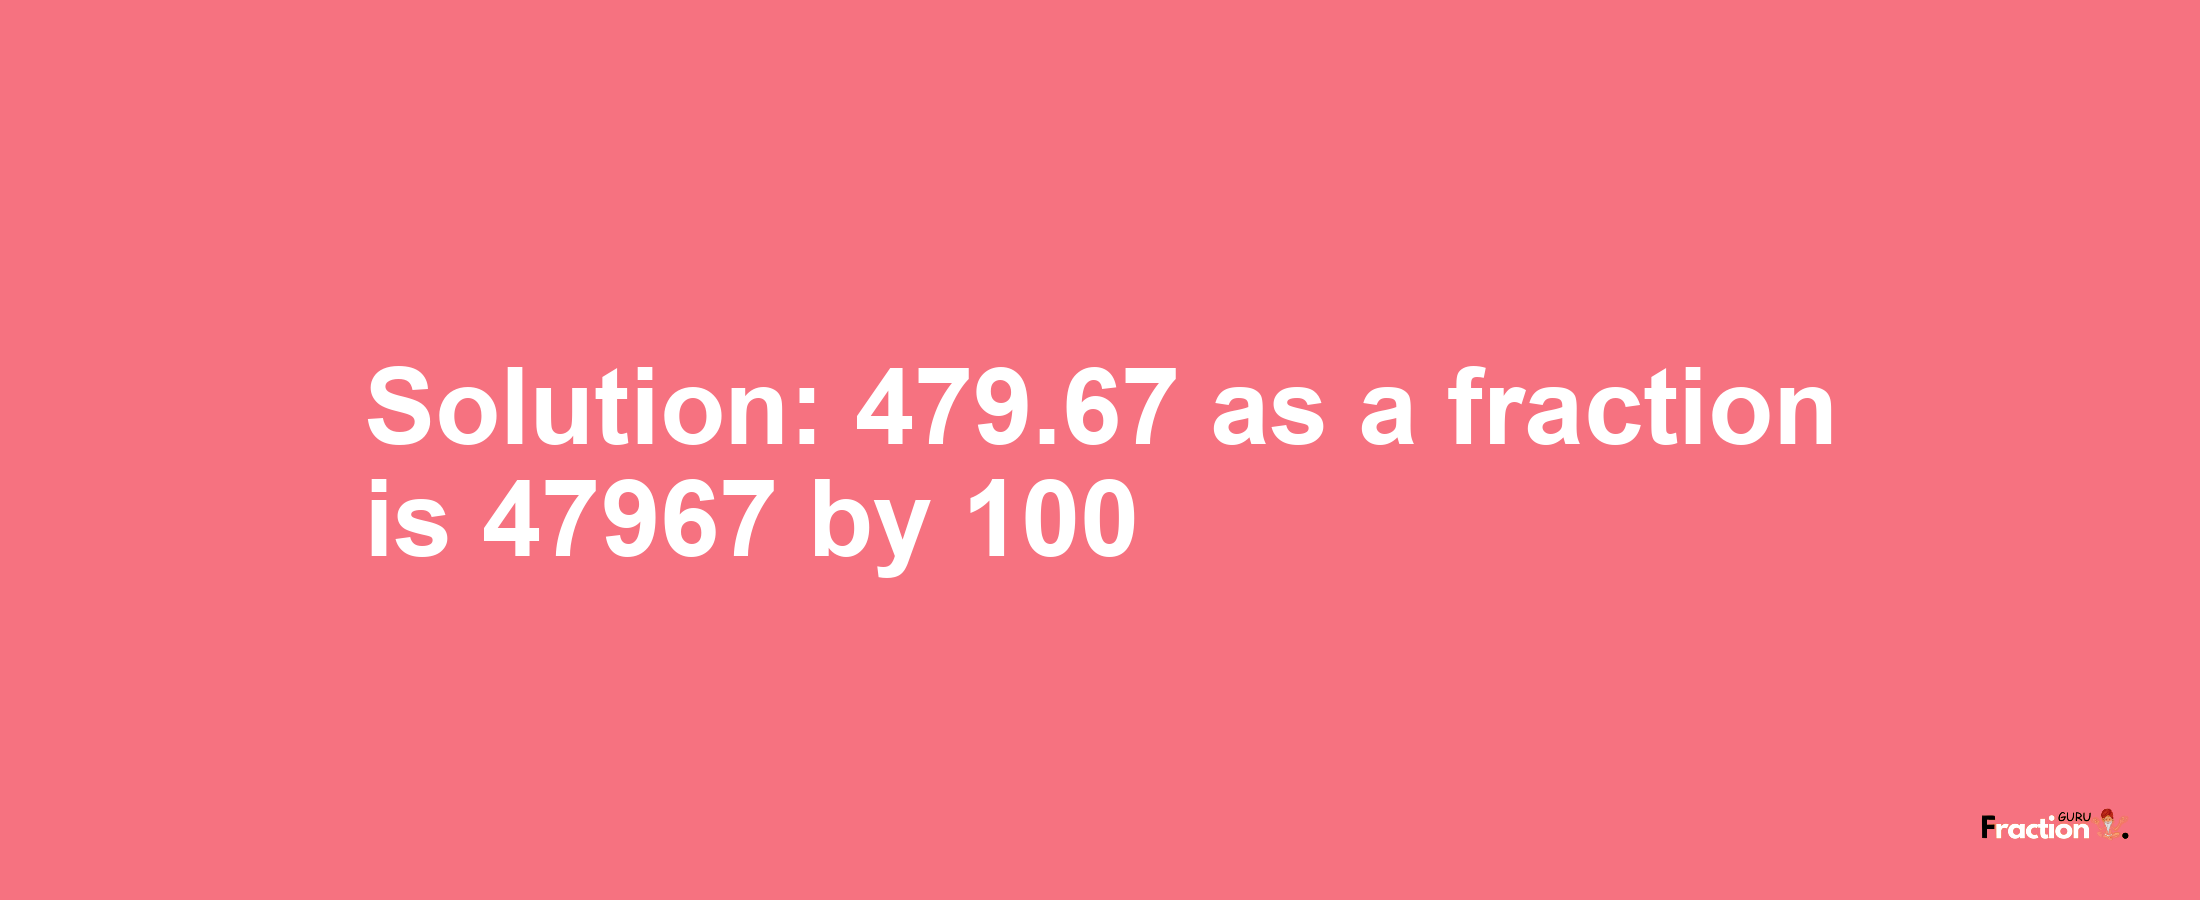 Solution:479.67 as a fraction is 47967/100